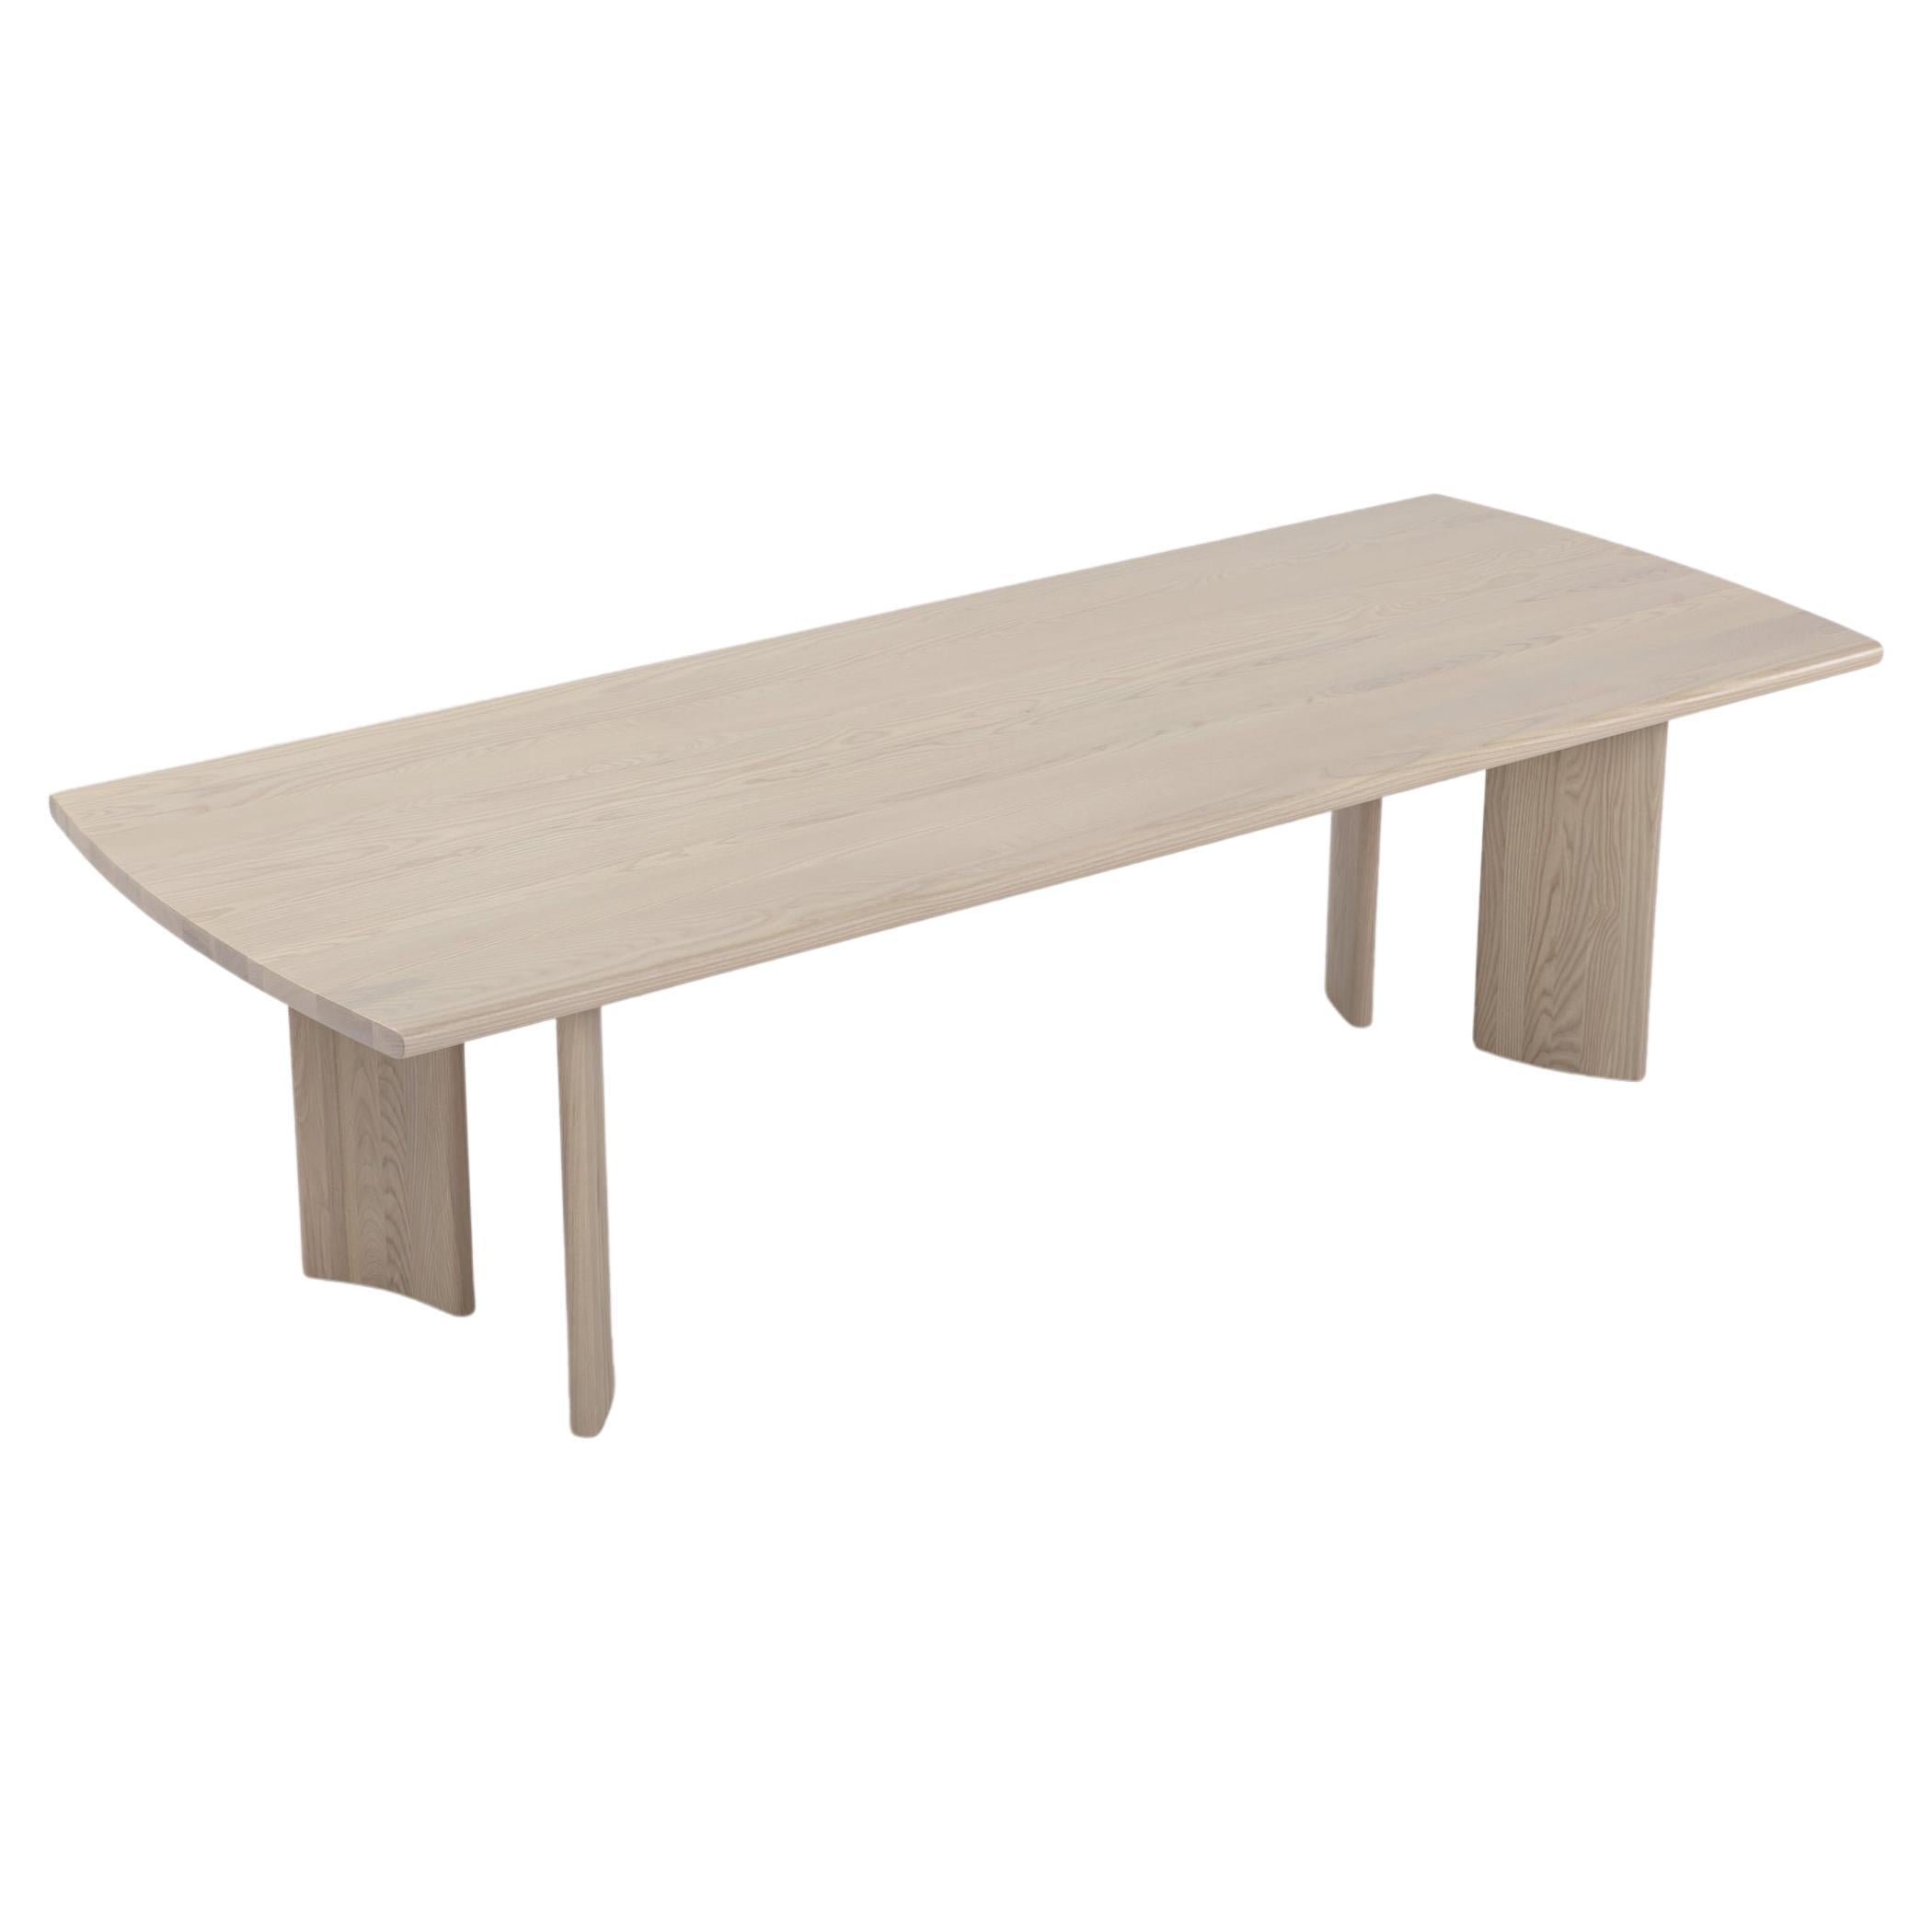 Crest 108" Dining Table Nude, Minimalist Dining Table in FSC White Ash